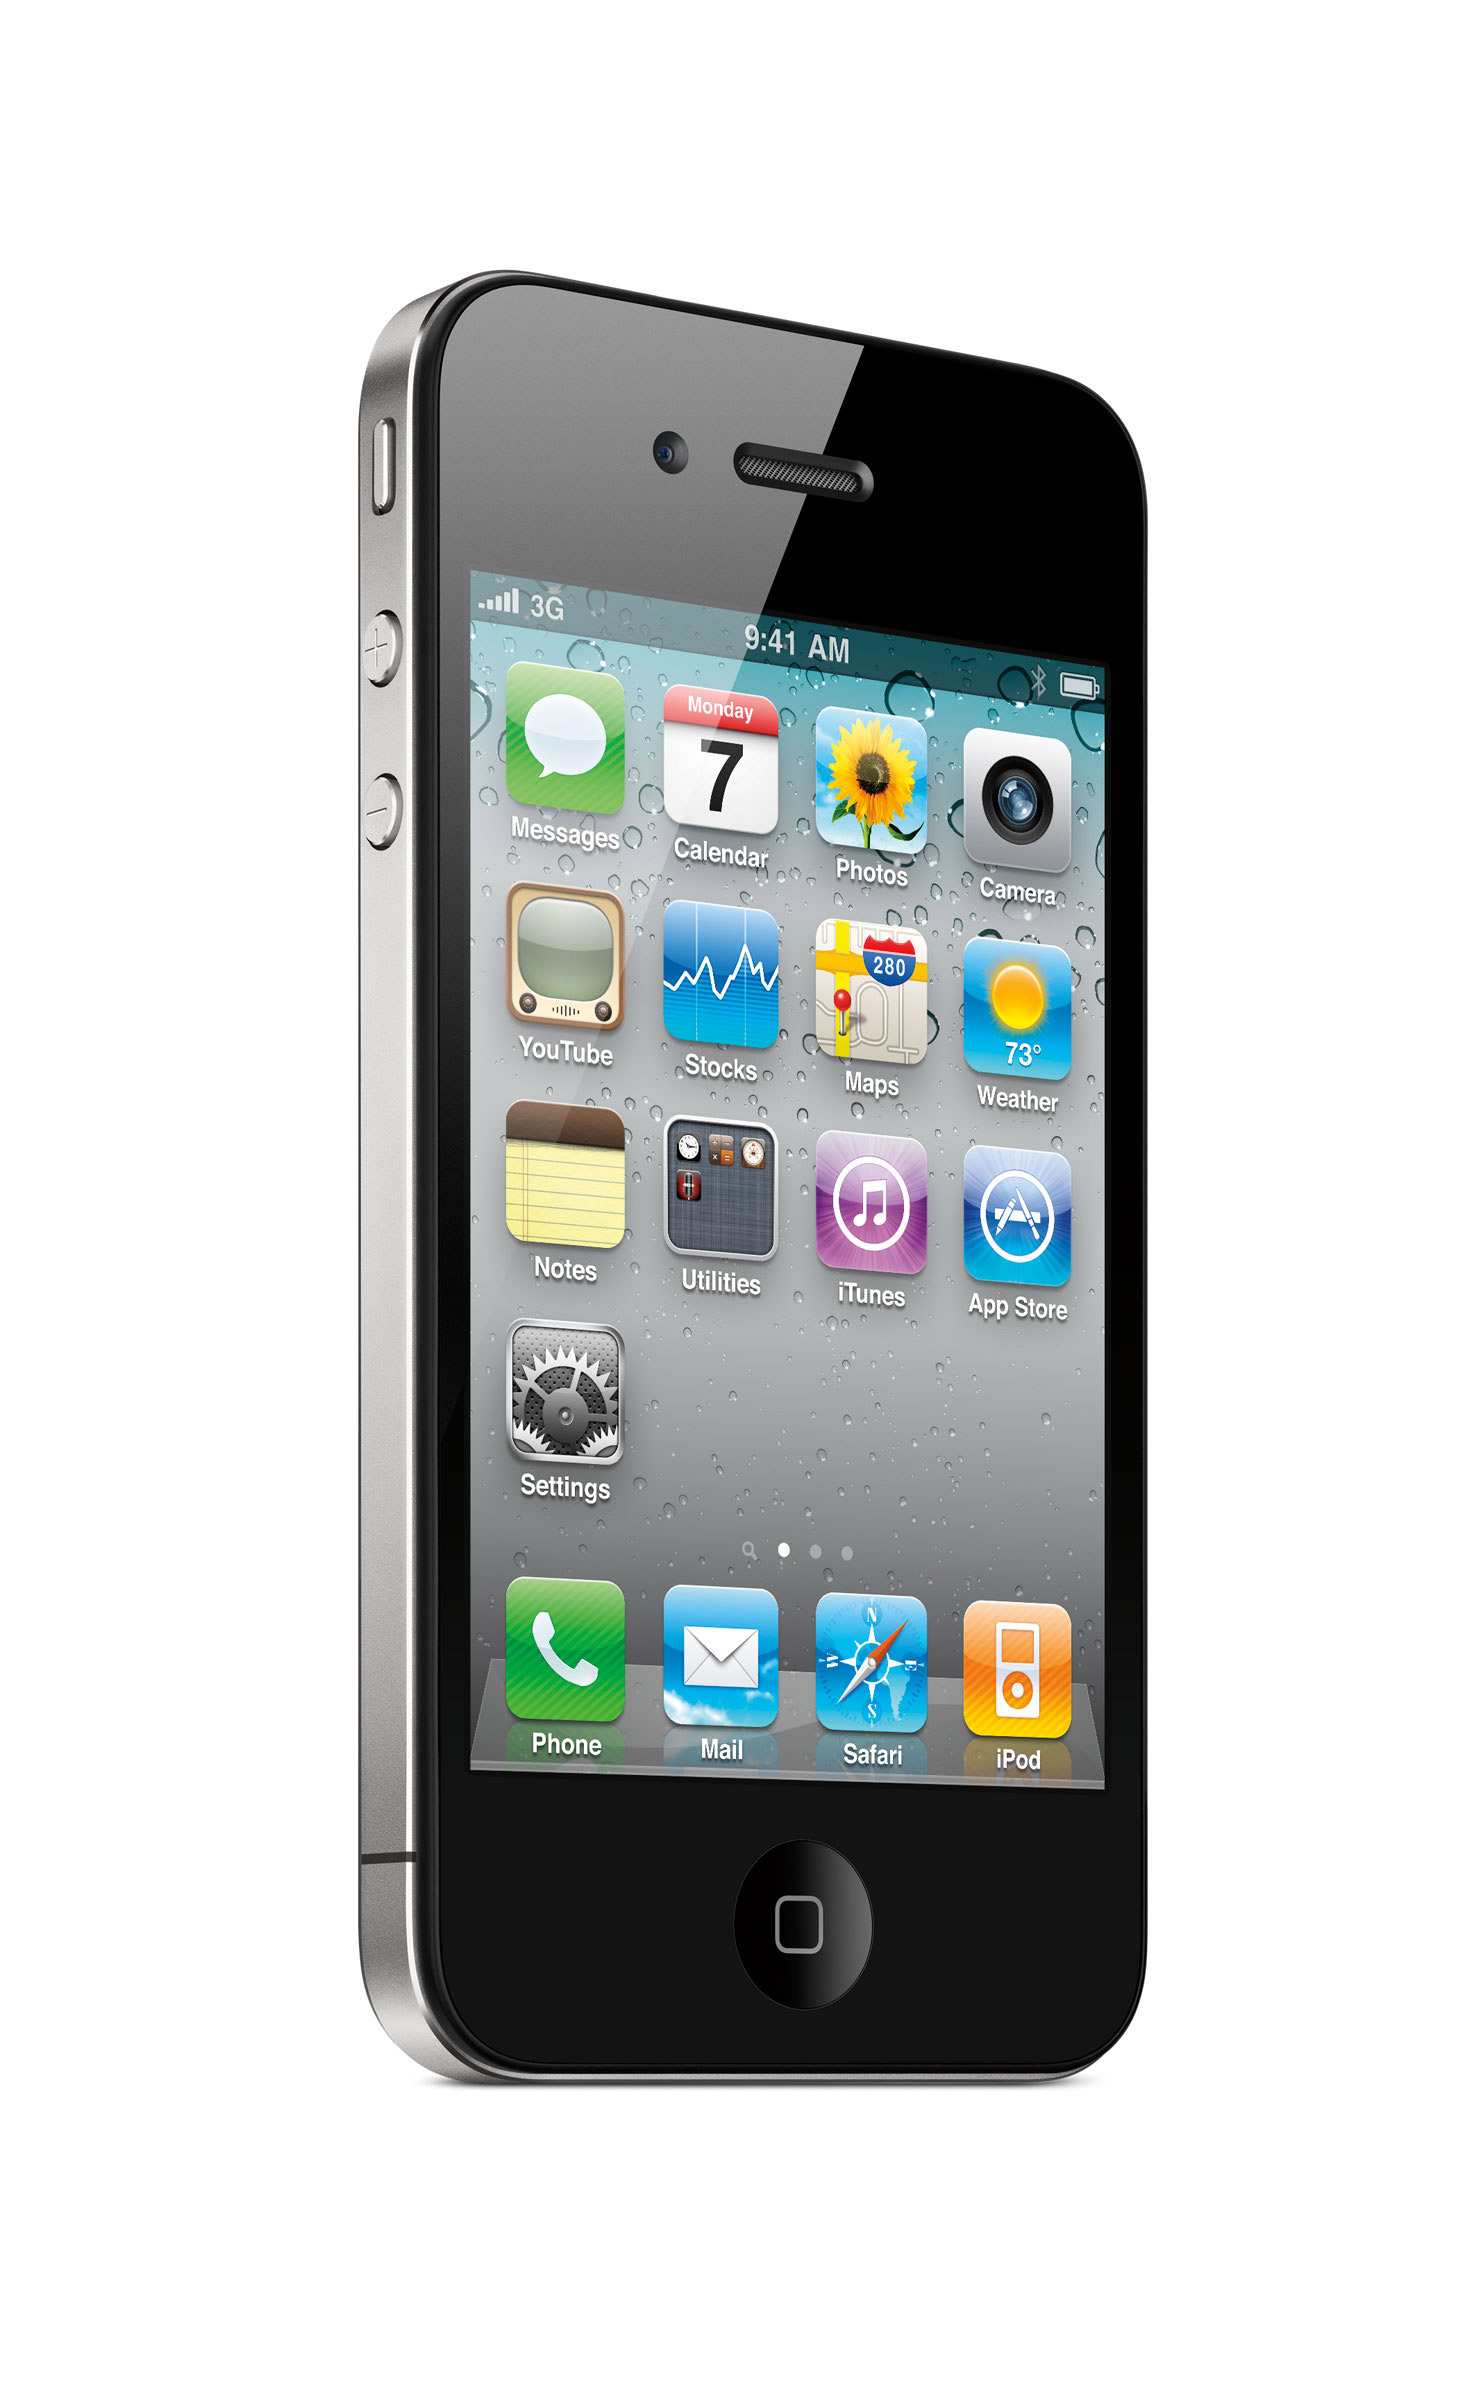 The Long-Awaited Release of iPhone 4s - Bask